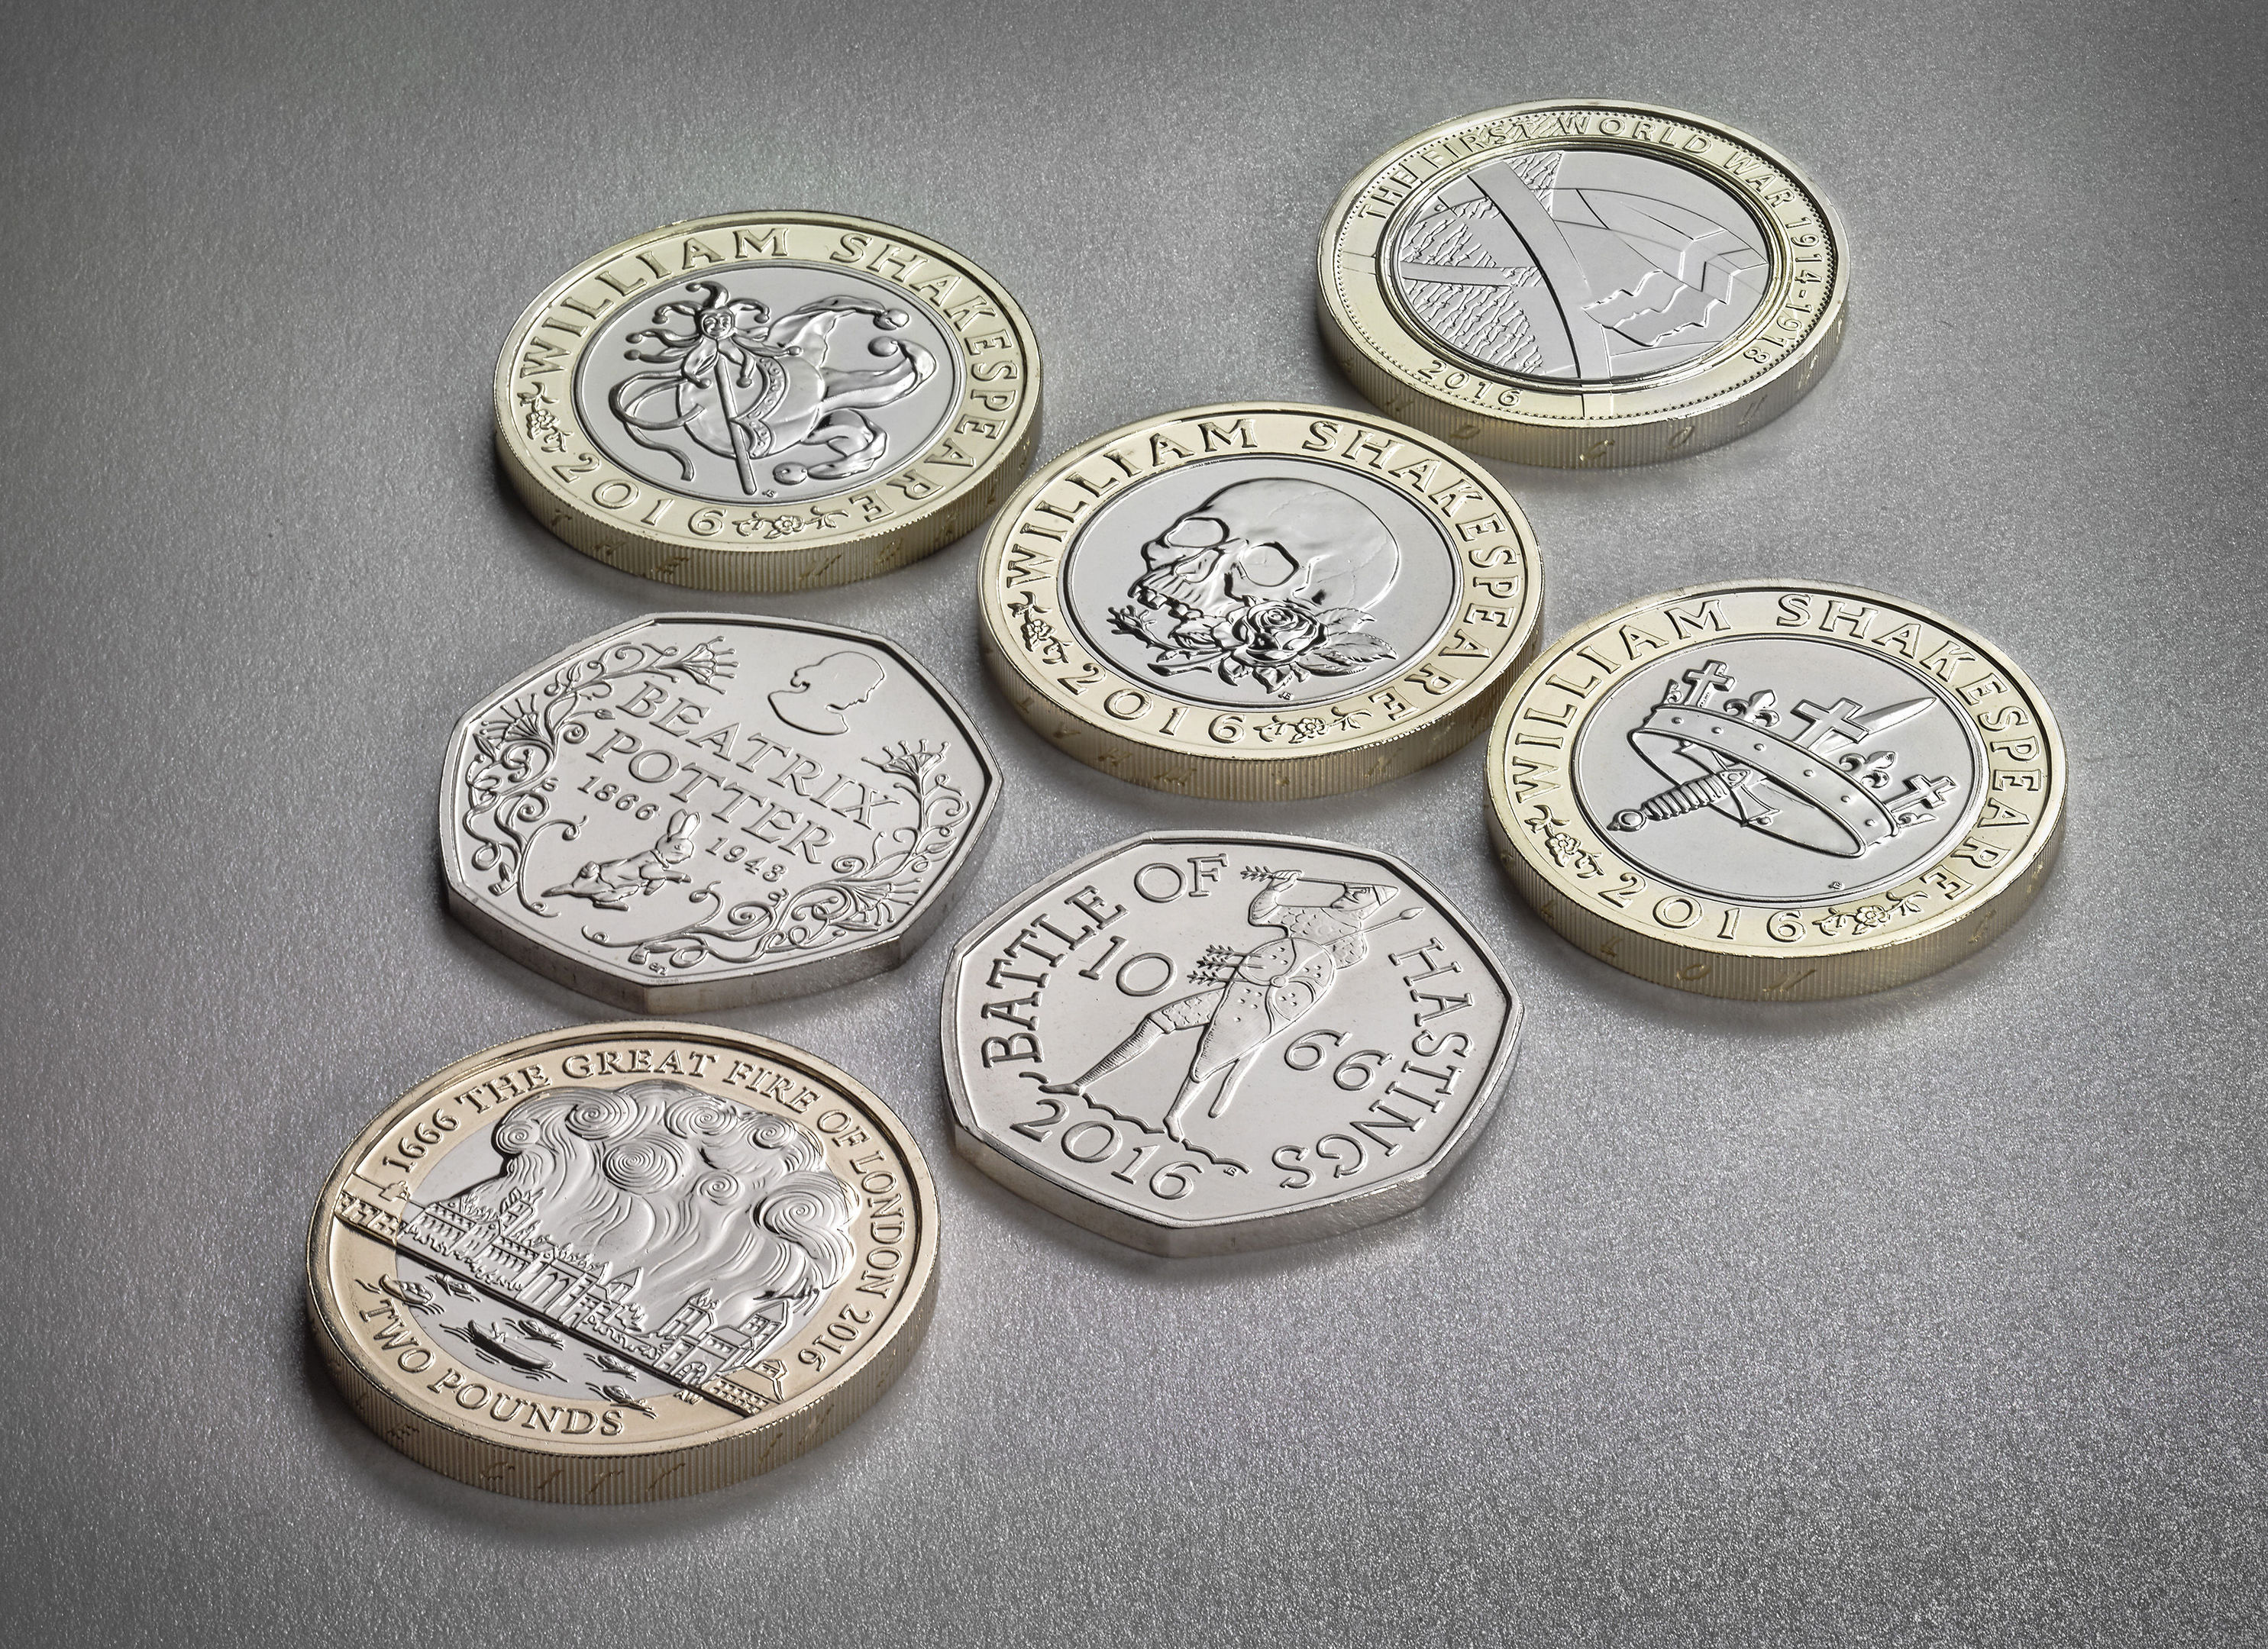 The new coin designs (Royal Mint / PA Wire)